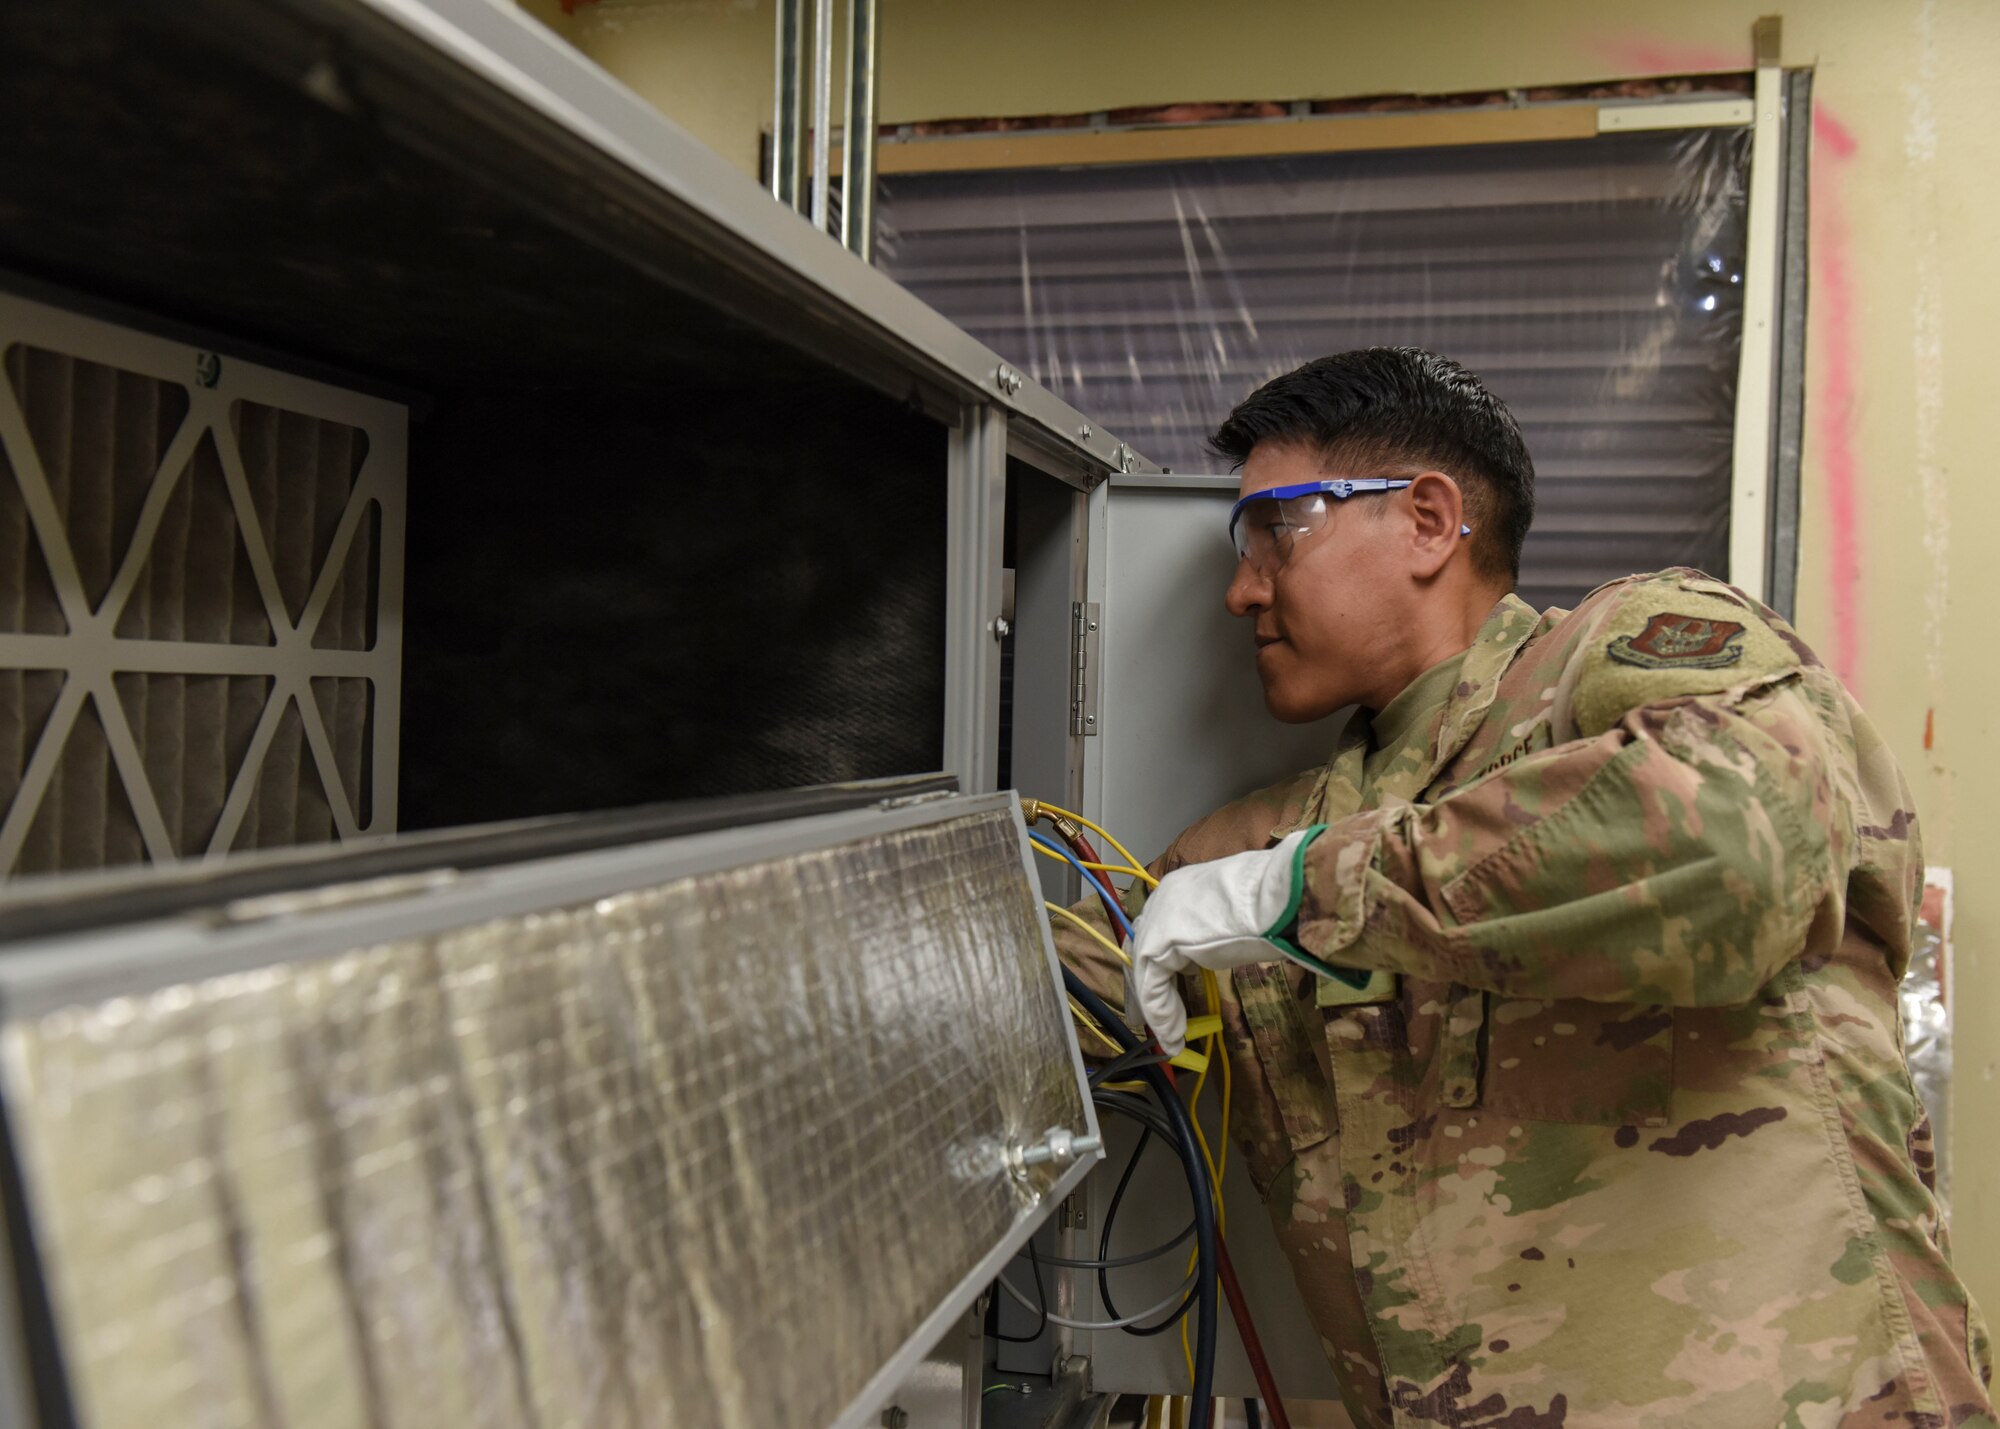 Staff Sgt. Andre Chamilco, 366th Training Squadron HVAC/R craftsman course student, ensures a ventilation system is properly functioning at Sheppard Air Force Base, Texas, Aug. 14, 2019. HVAC/R technicians are essential for the functionality of a base. Having proper heating and cooling systems within buildings assists with the welfare of base personnel. (U.S. Air Force photo by Senior Airman Ilyana A. Escalona)